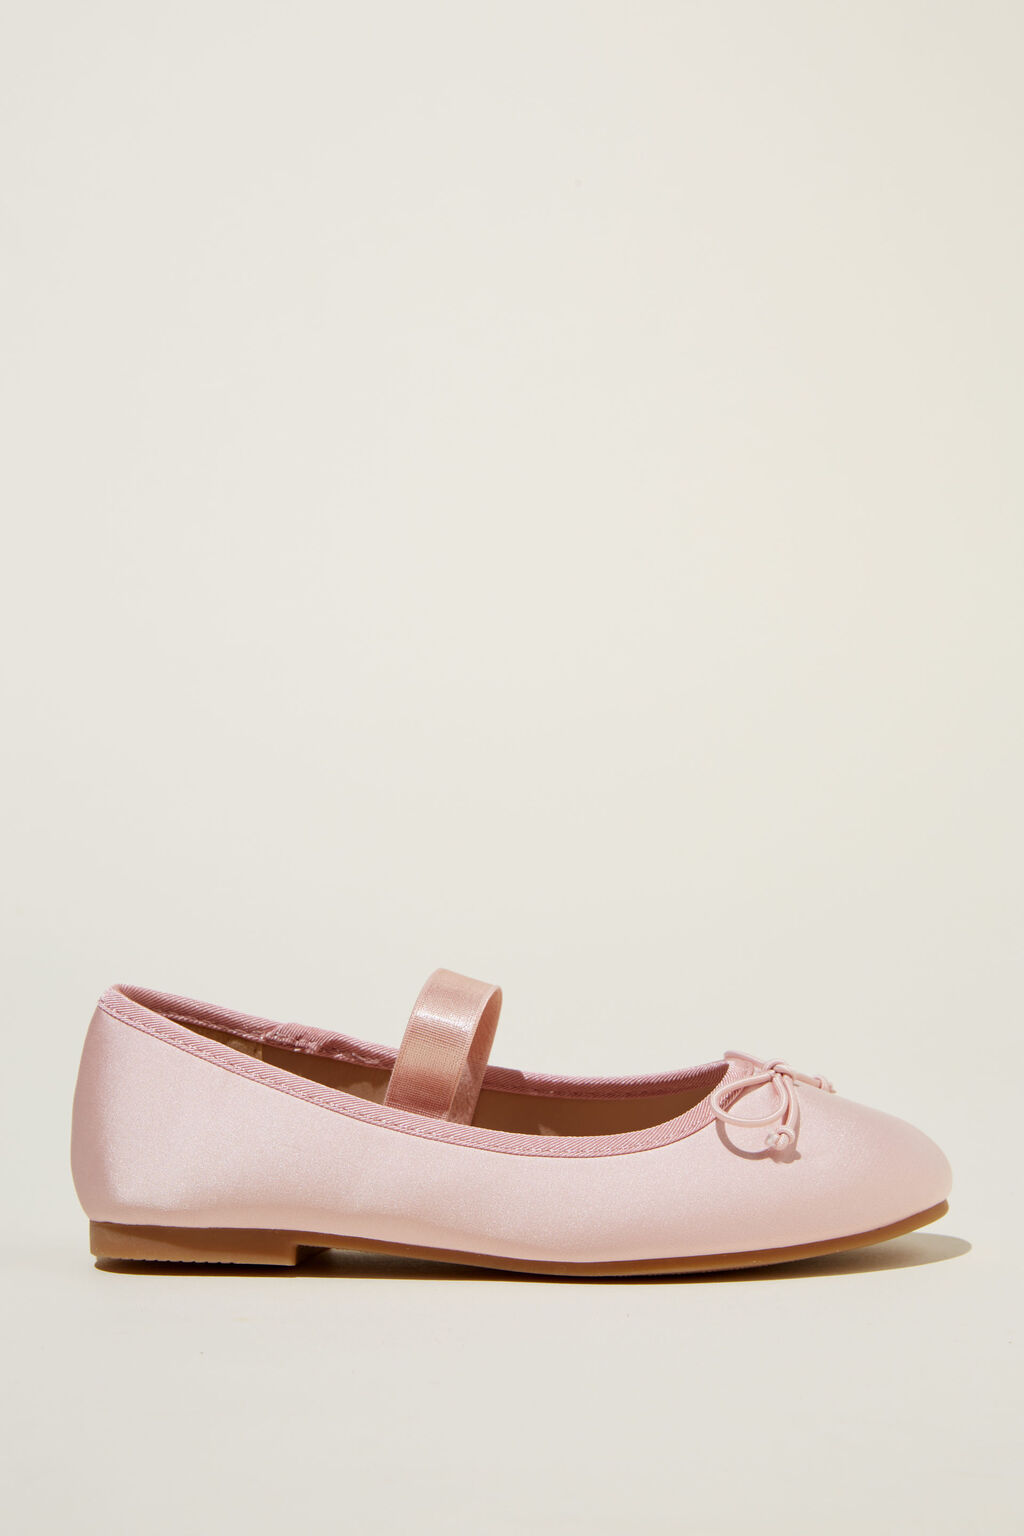 Girls Shoes - Ballet Flats, Boots, Sneakers & Sandals | Cotton On Kids ...